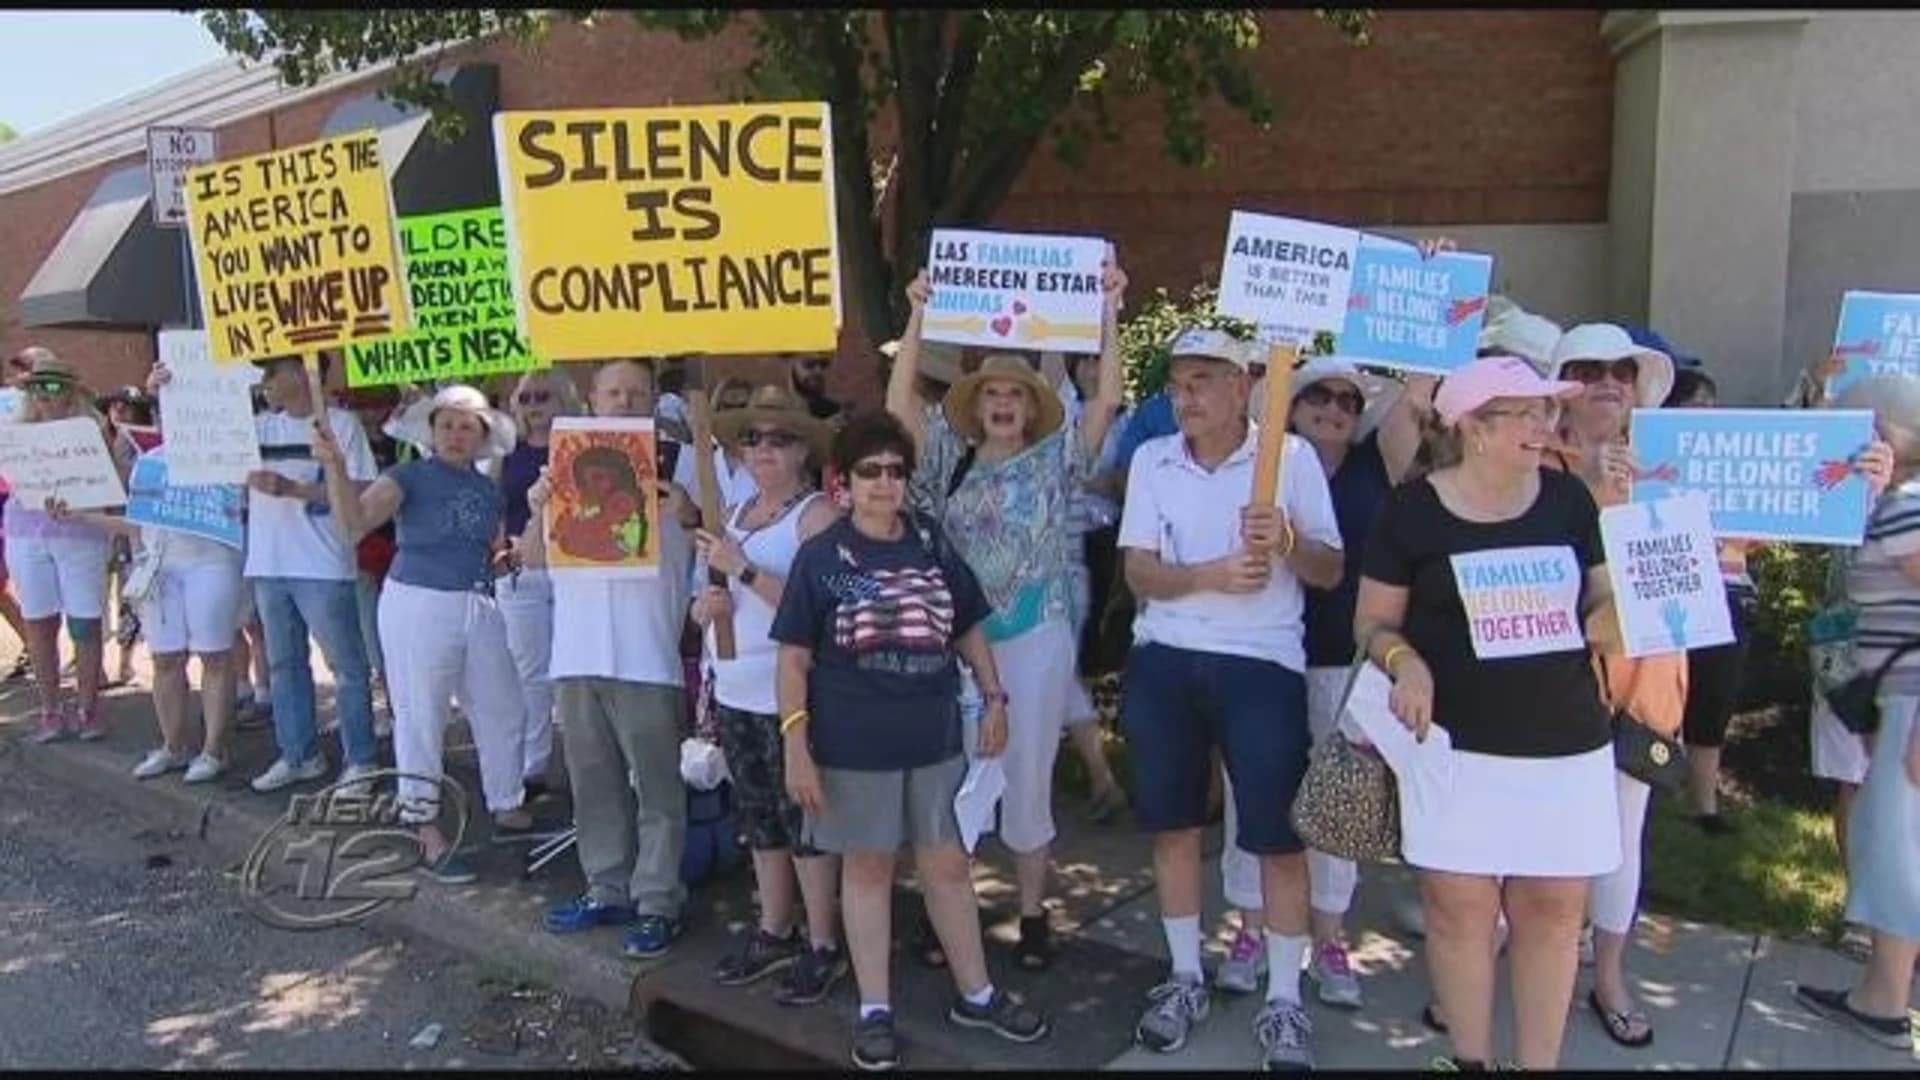 Long Islanders take part in protests over immigration policies